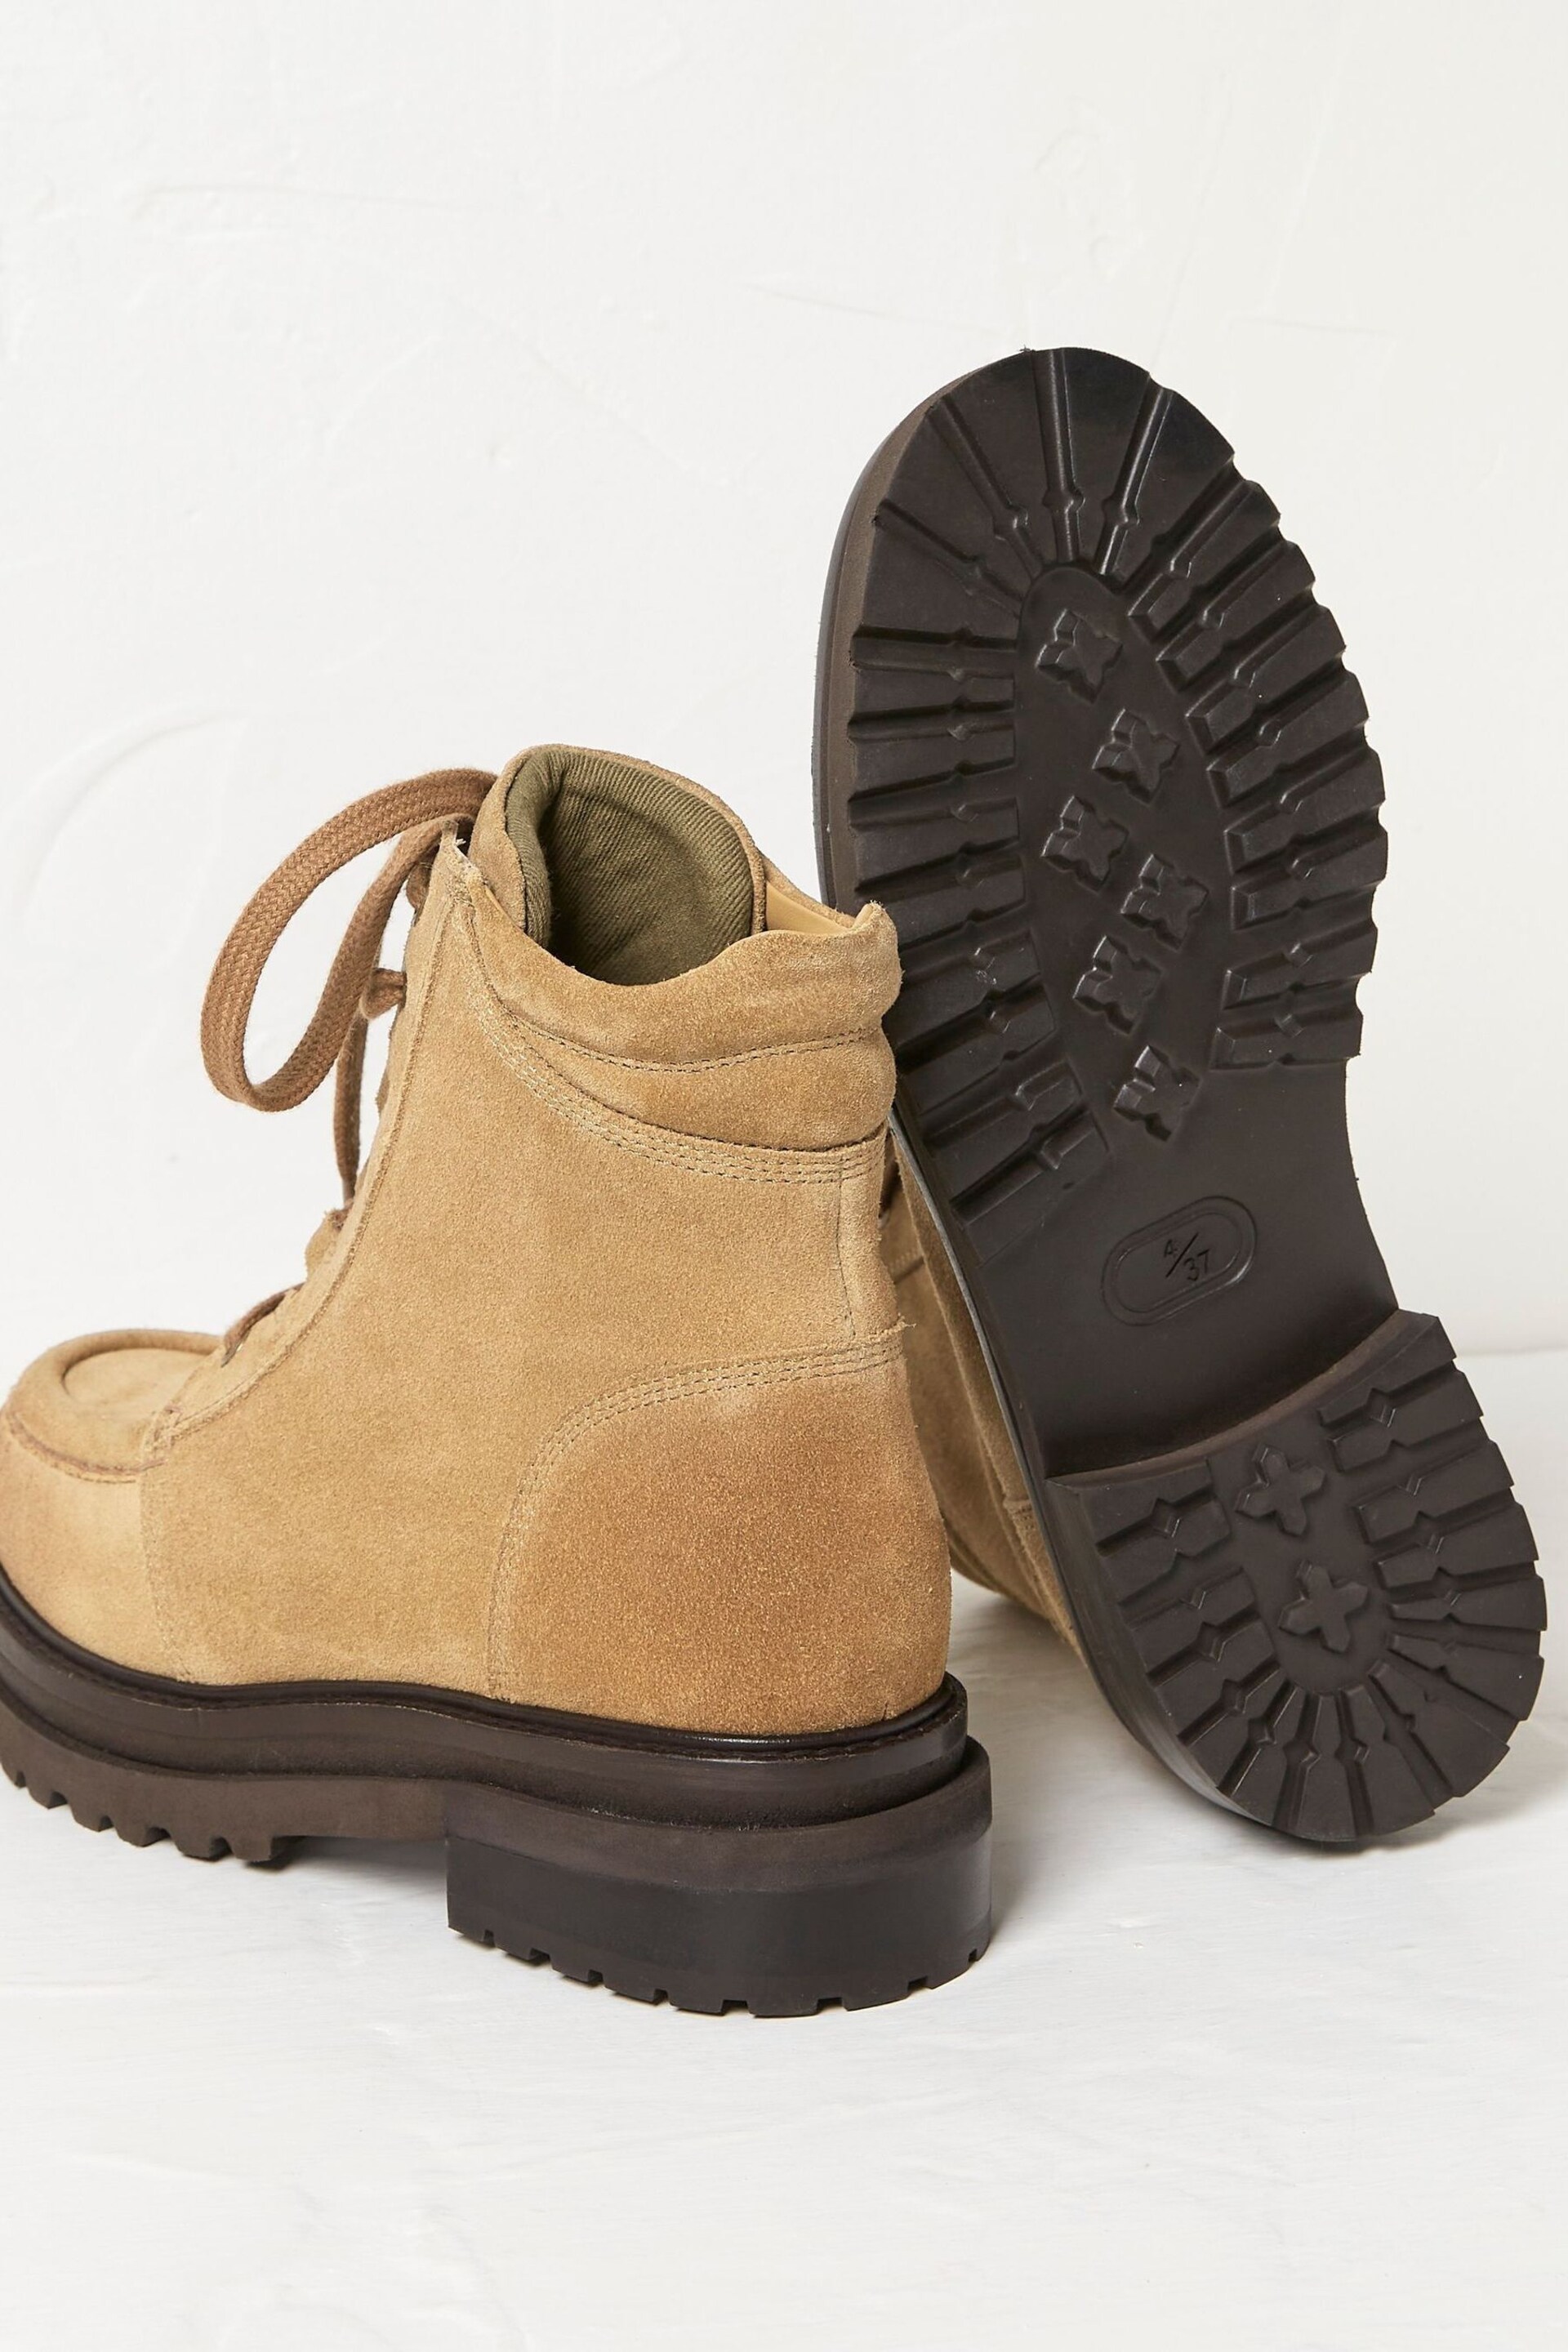 FatFace Brown Clover Suede Apron Ankle Boots - Image 3 of 4